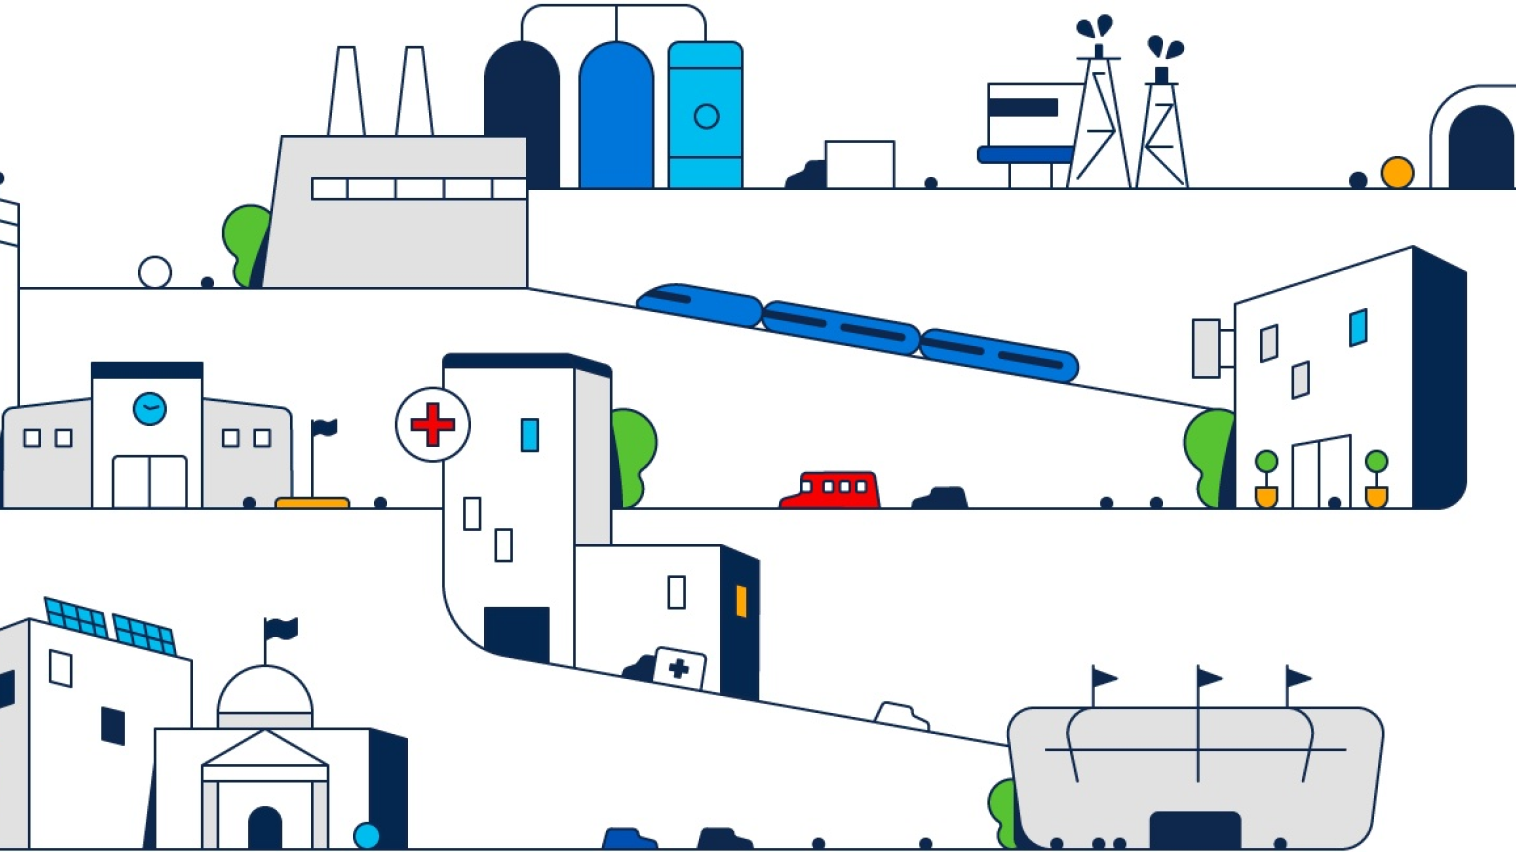 A colorful line illustration depicting places in a city such as a hospital, stadium, power plant and university.